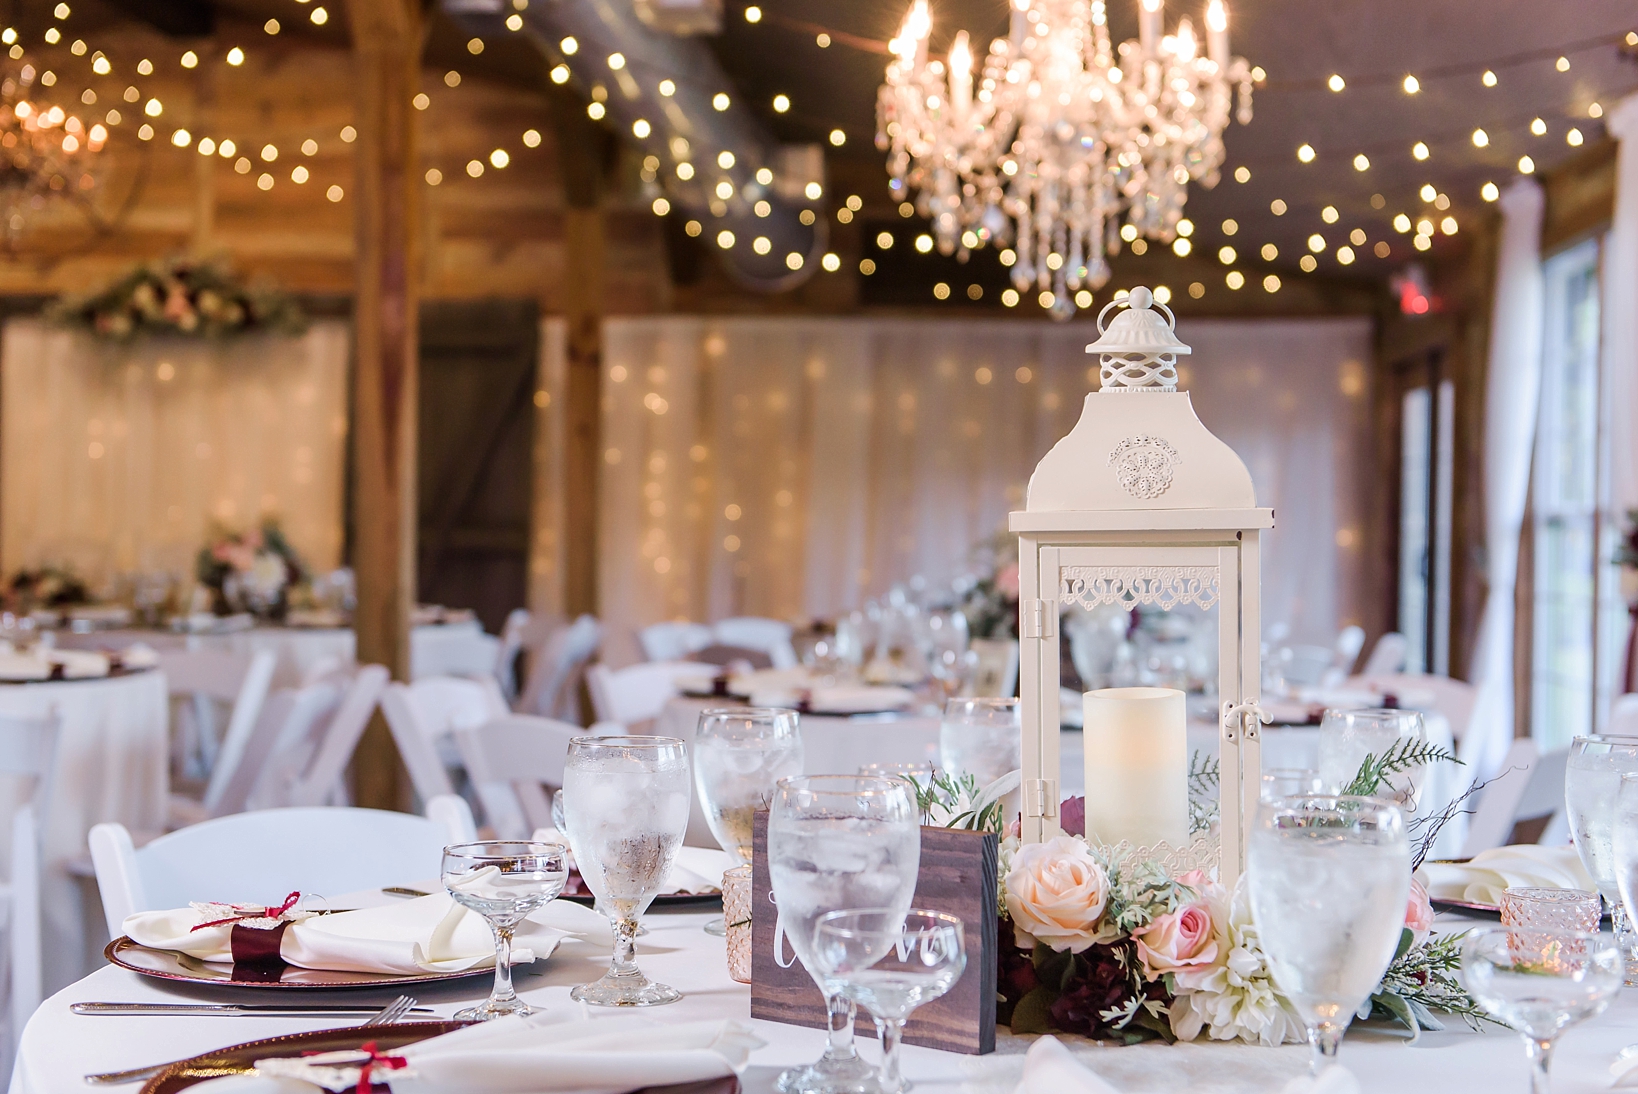 Table centerpieces of flowers and lanterns surrounded by string lights in a rustic barn setting